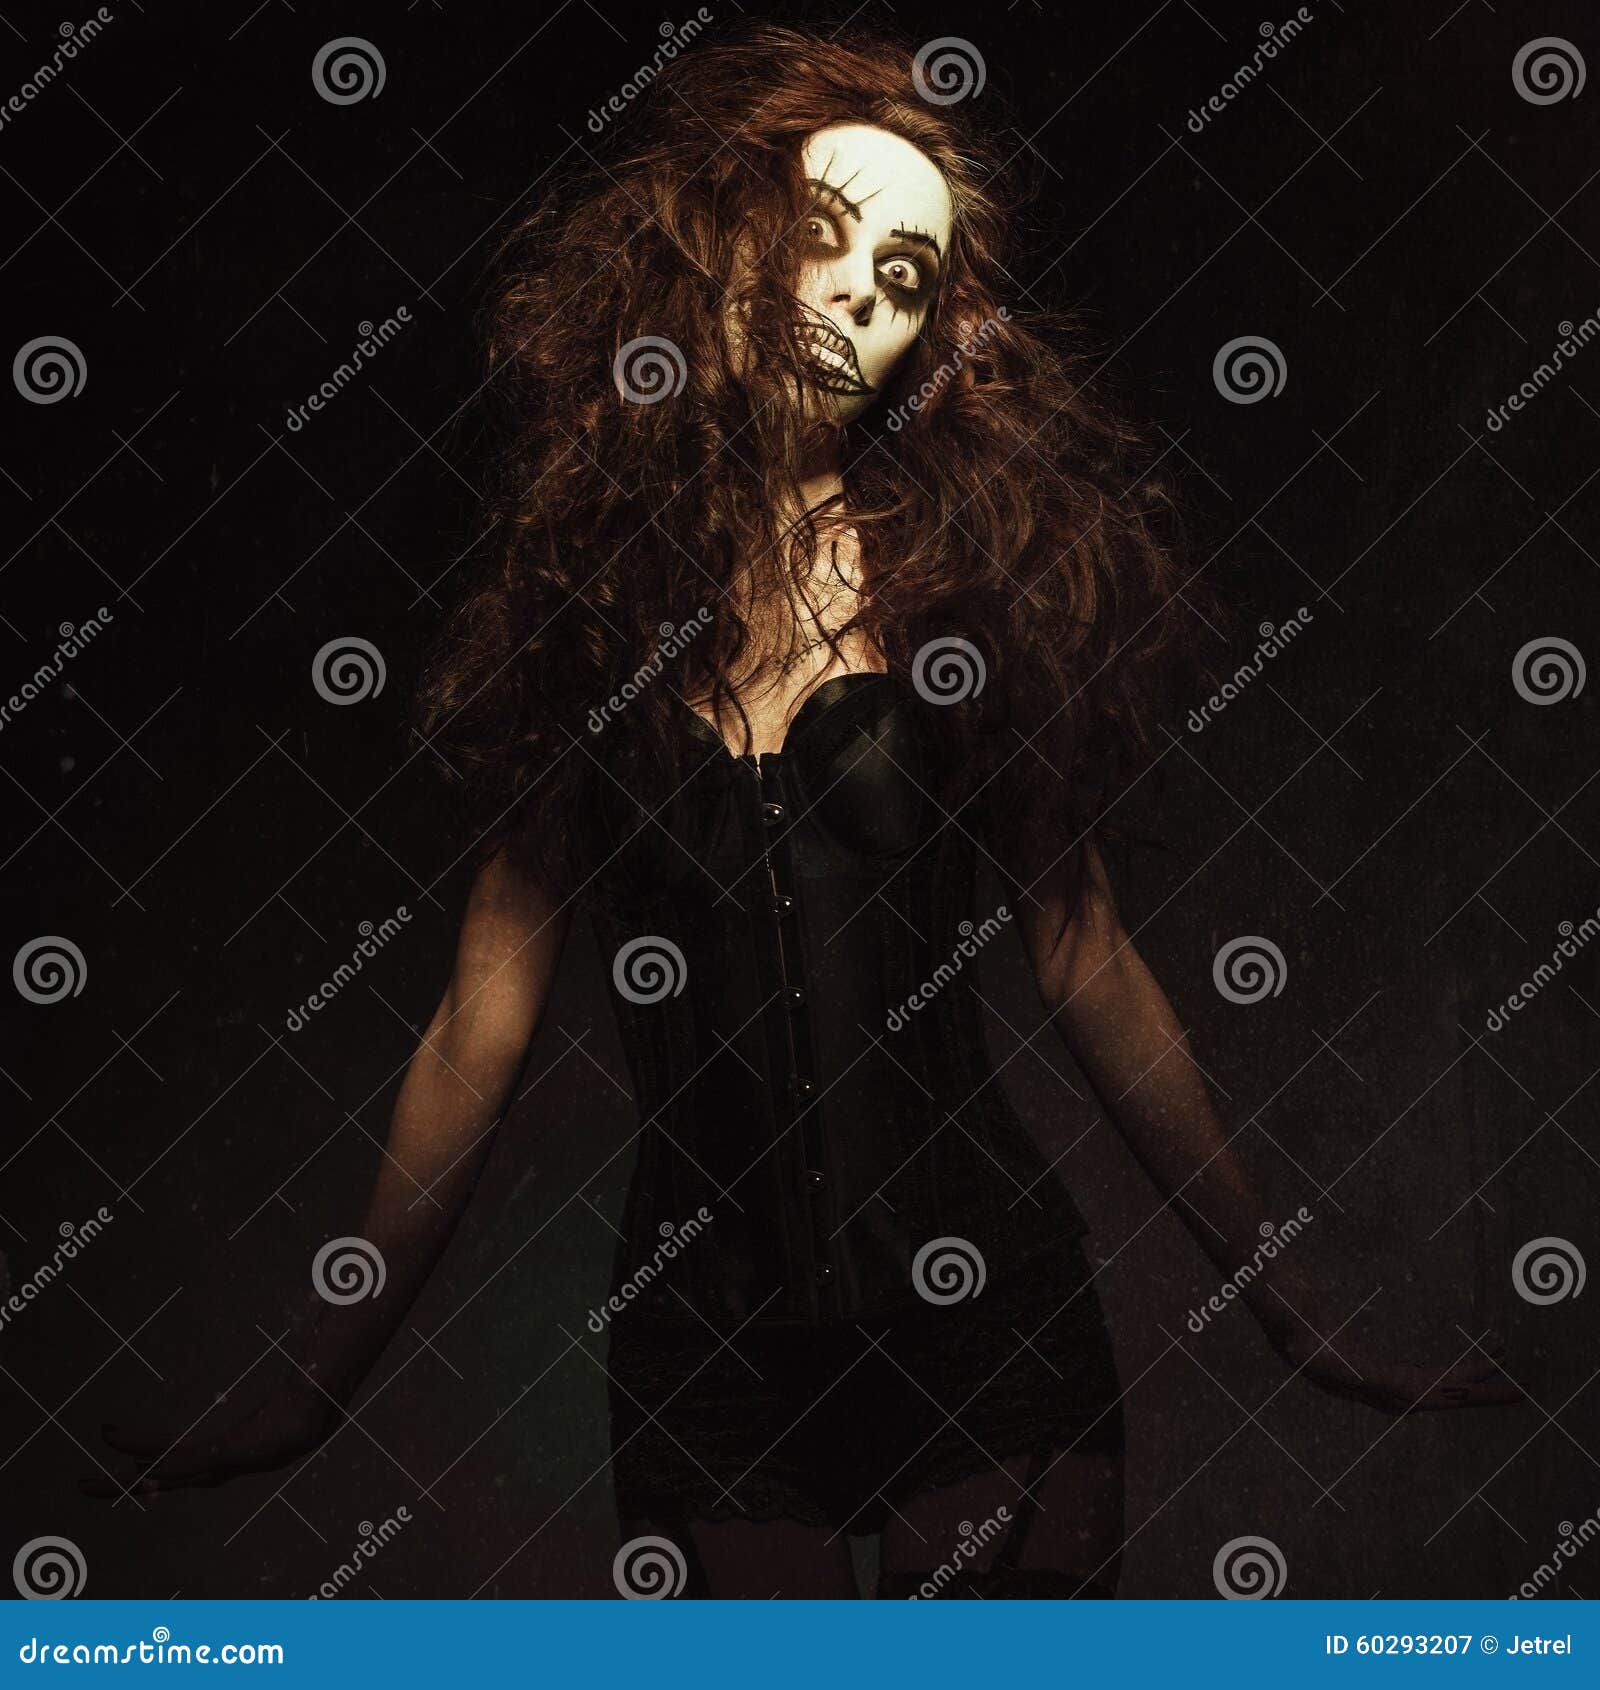 Young Woman in the Image of Sad Gothic Freak Clown. Grunge Texture ...